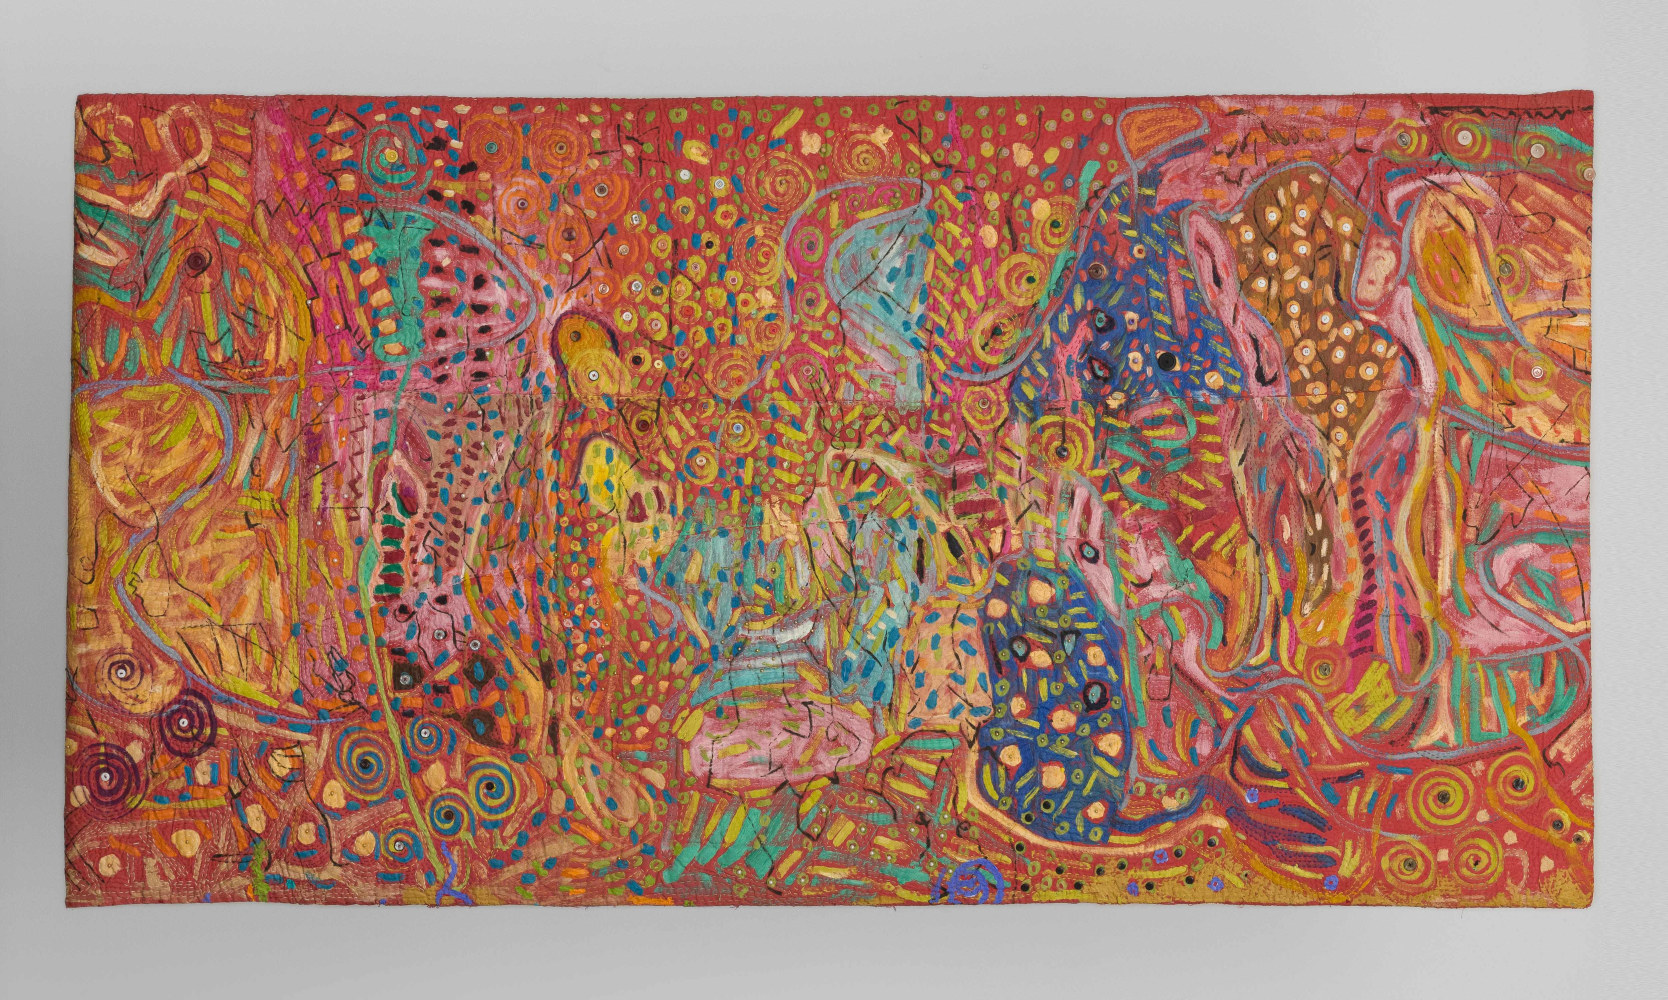 Pacita Abad (1946-2004)
Colorful Nights, 1996
Oil, mirrors, buttons, plastic pearls stitched on canvas
59 x 110 in
149 7/8 x 279 3/8 cm